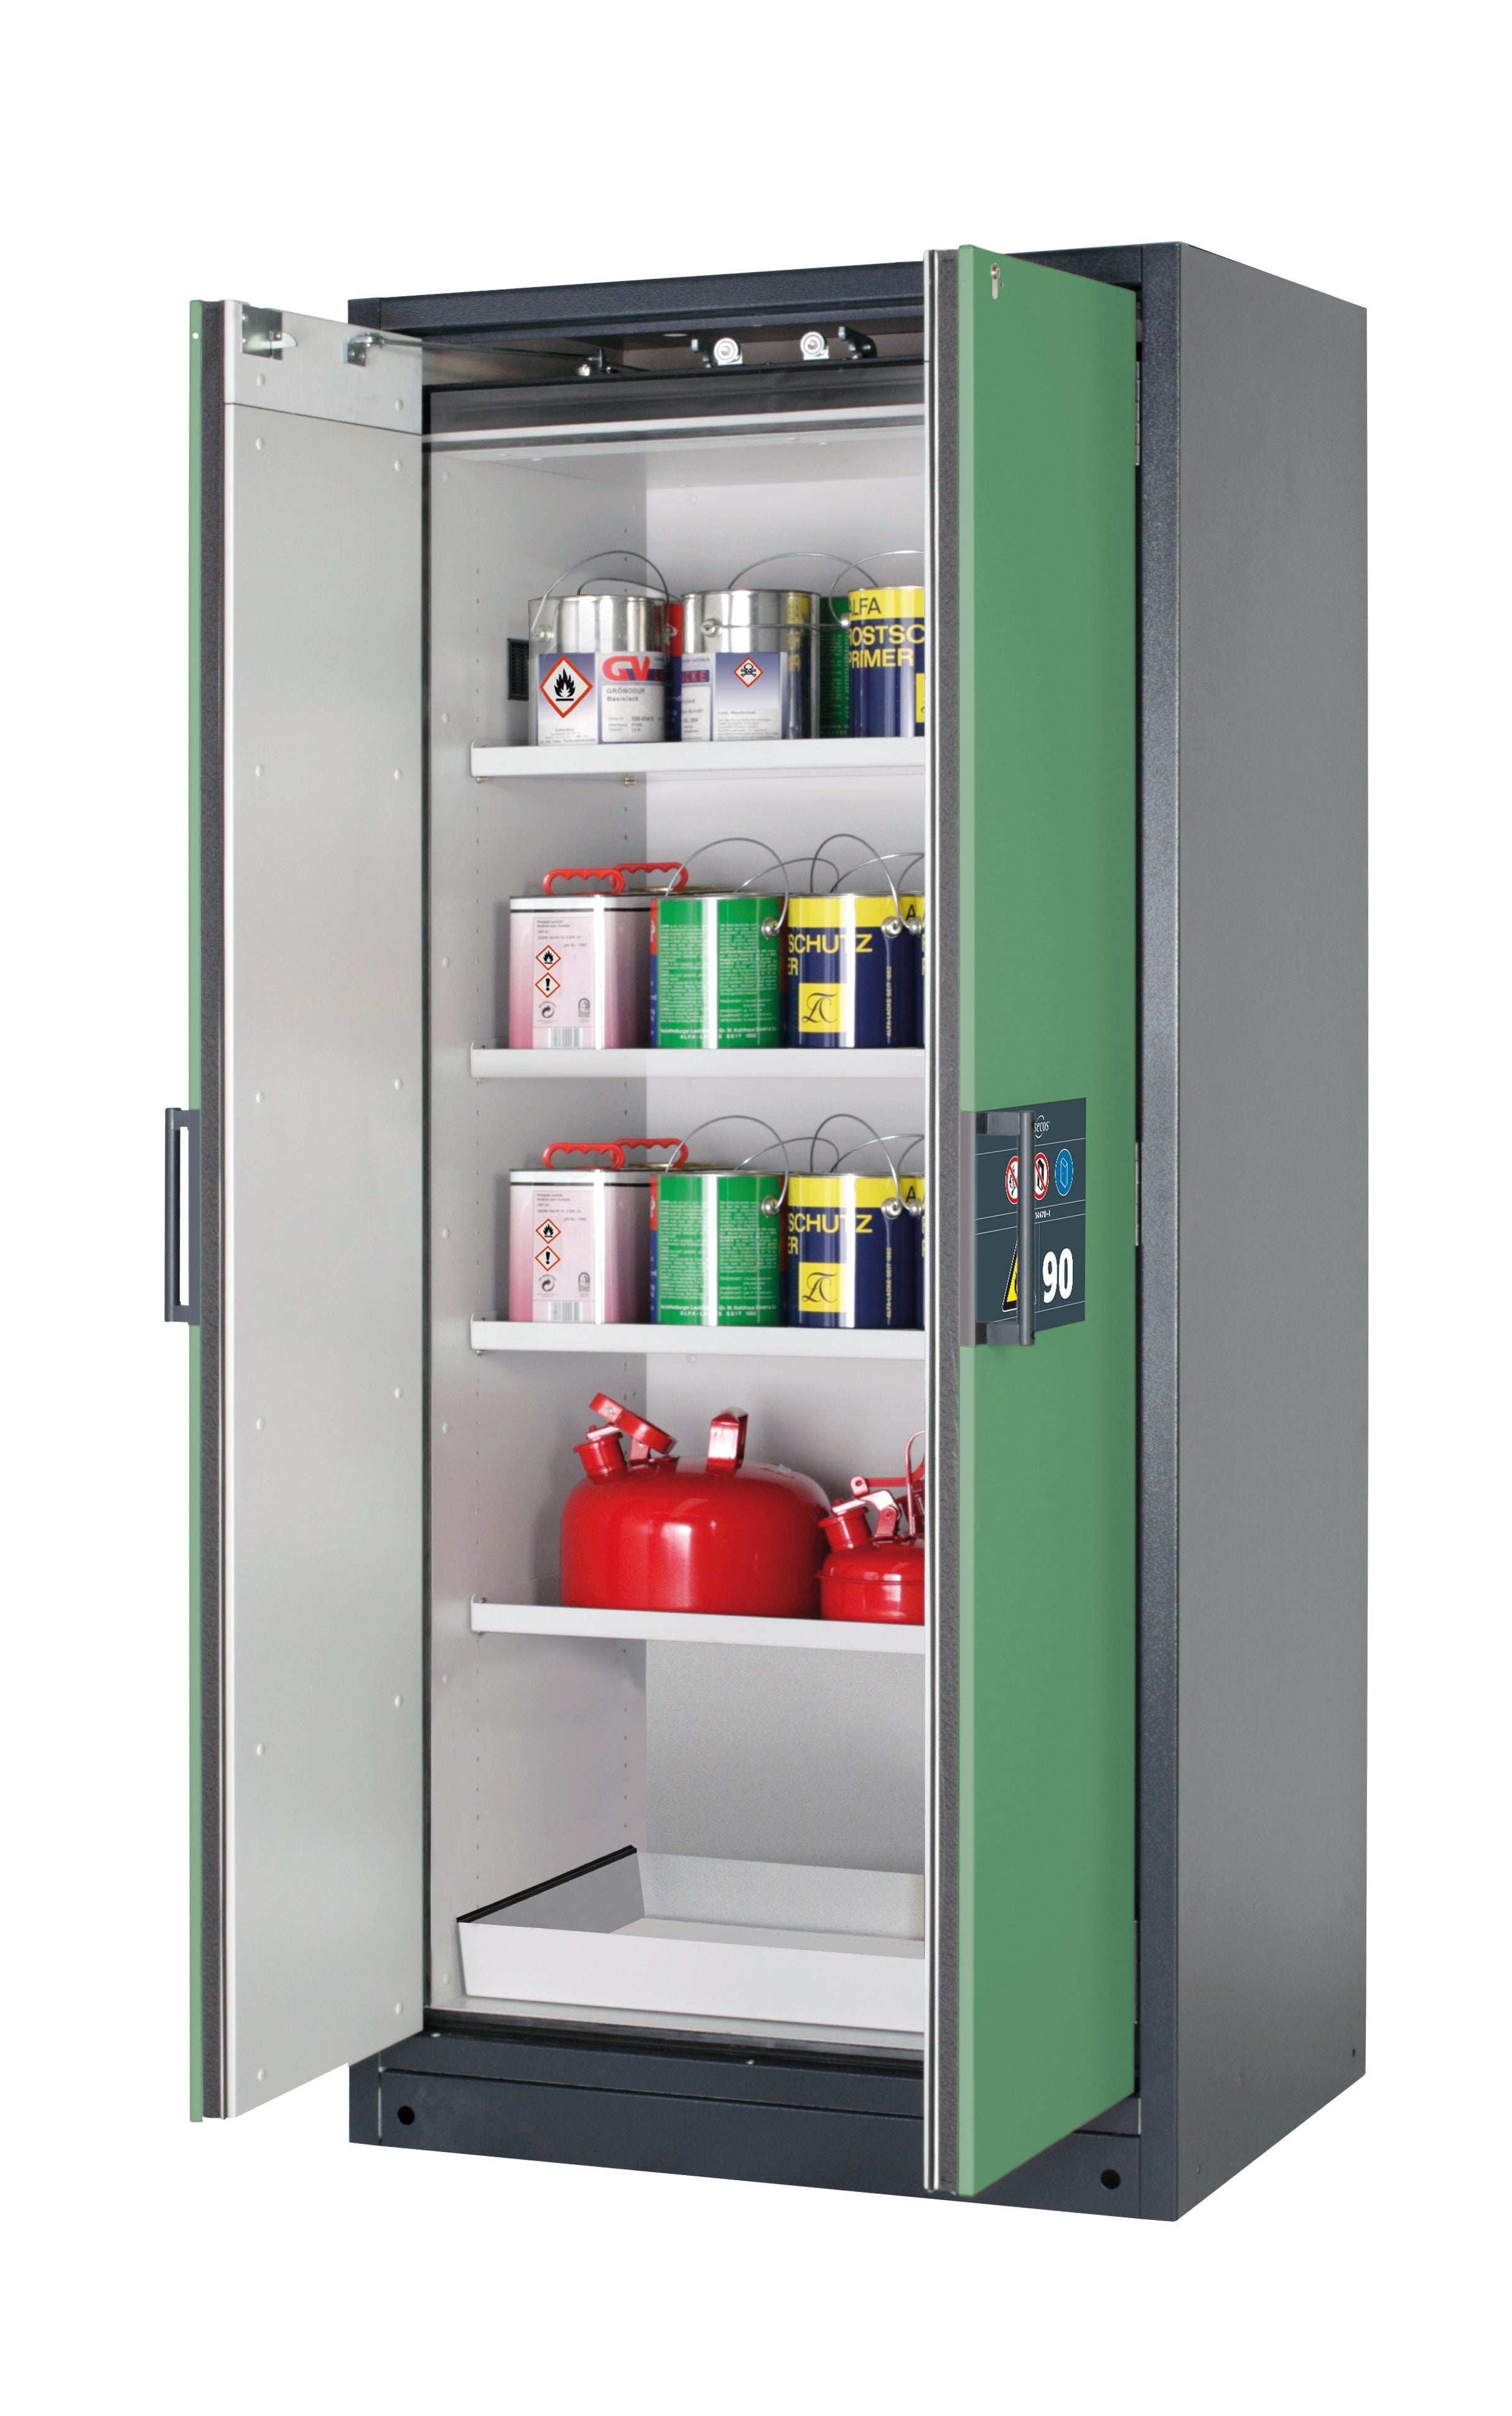 Type 90 safety storage cabinet Q-CLASSIC-90 model Q90.195.090 in reseda green RAL 6011 with 4x shelf standard (sheet steel),